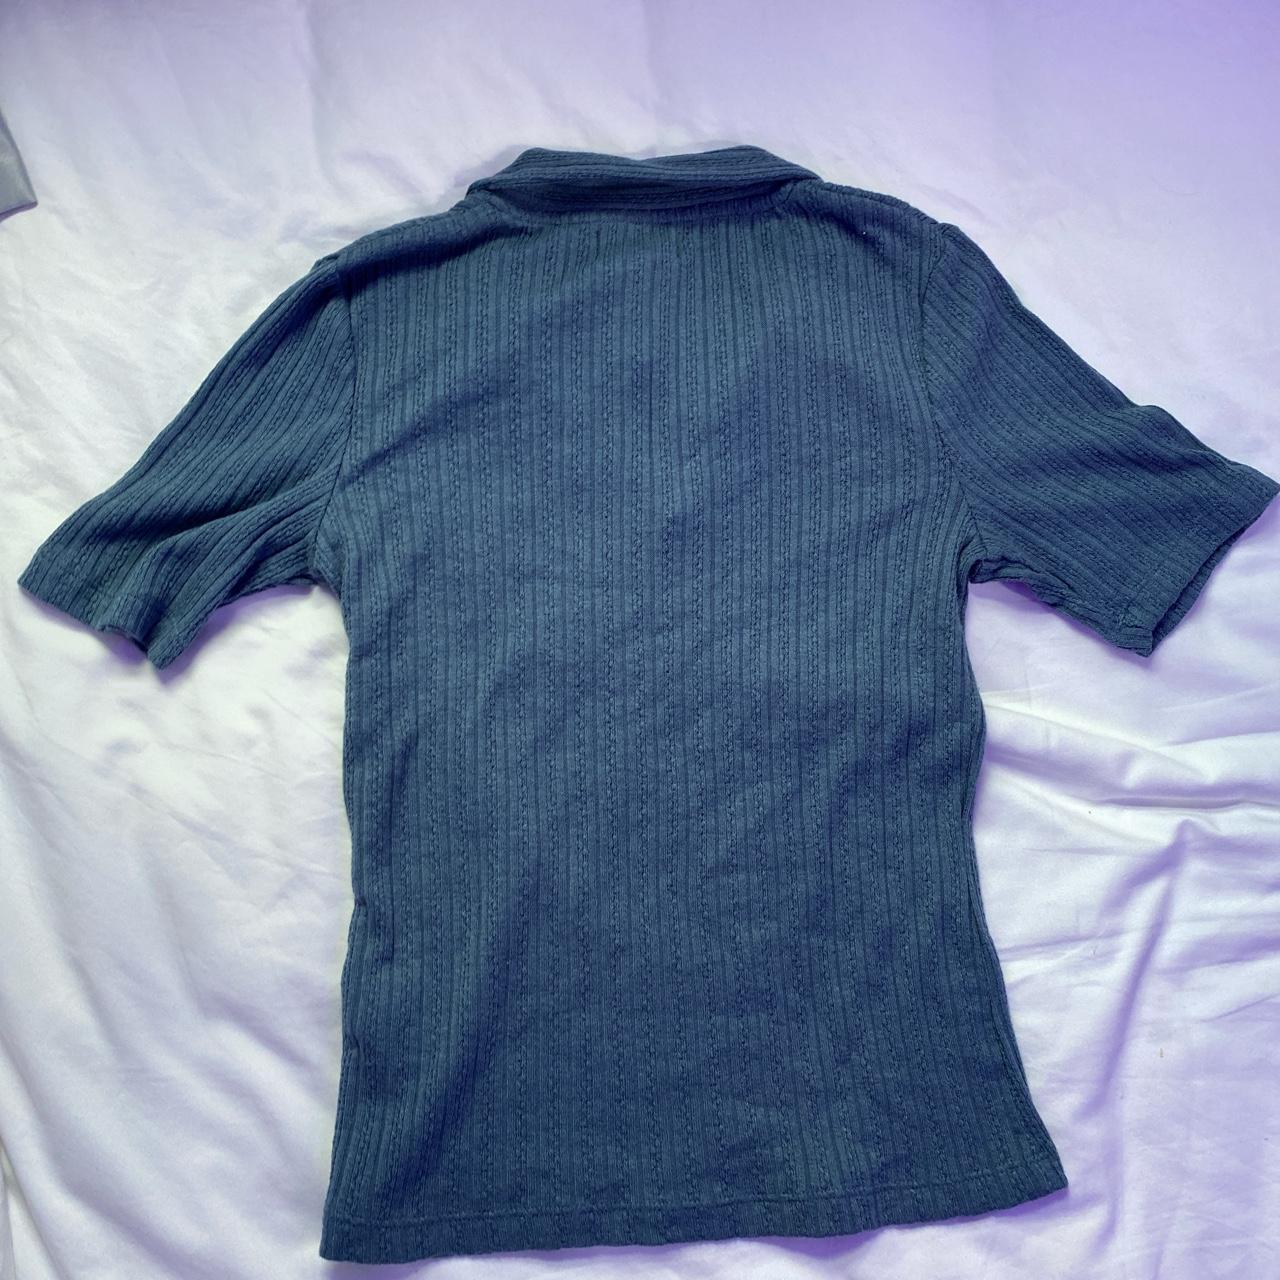 Product Image 2 - Lindex Polo Knit Tee 🧵
Bought